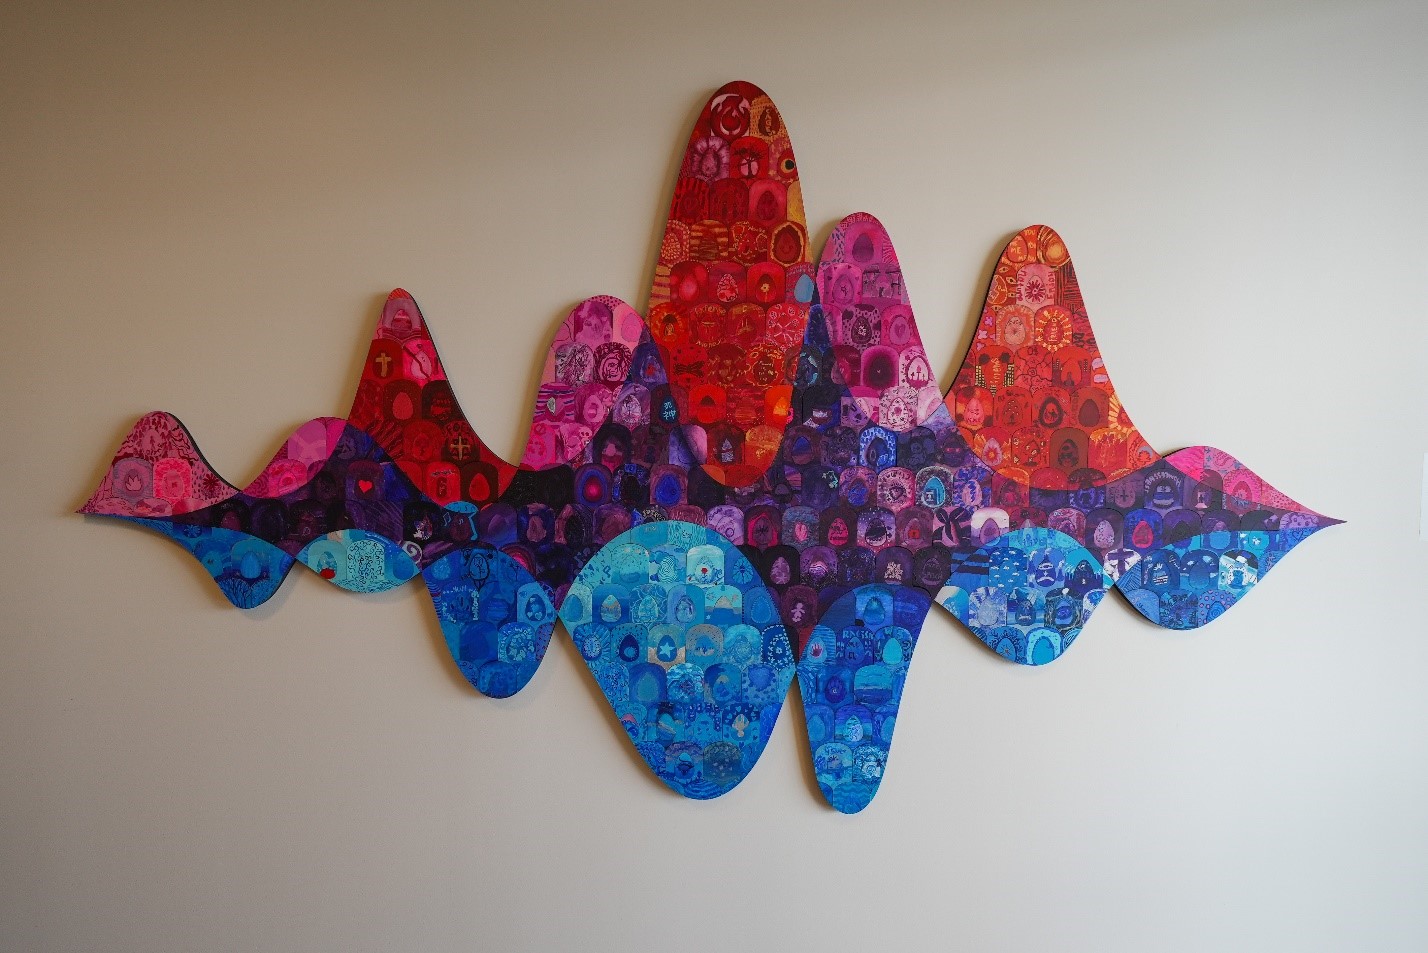 A “multi-vocal” artwork created by Adams County students and artist Mollie Hosmer-Dillard